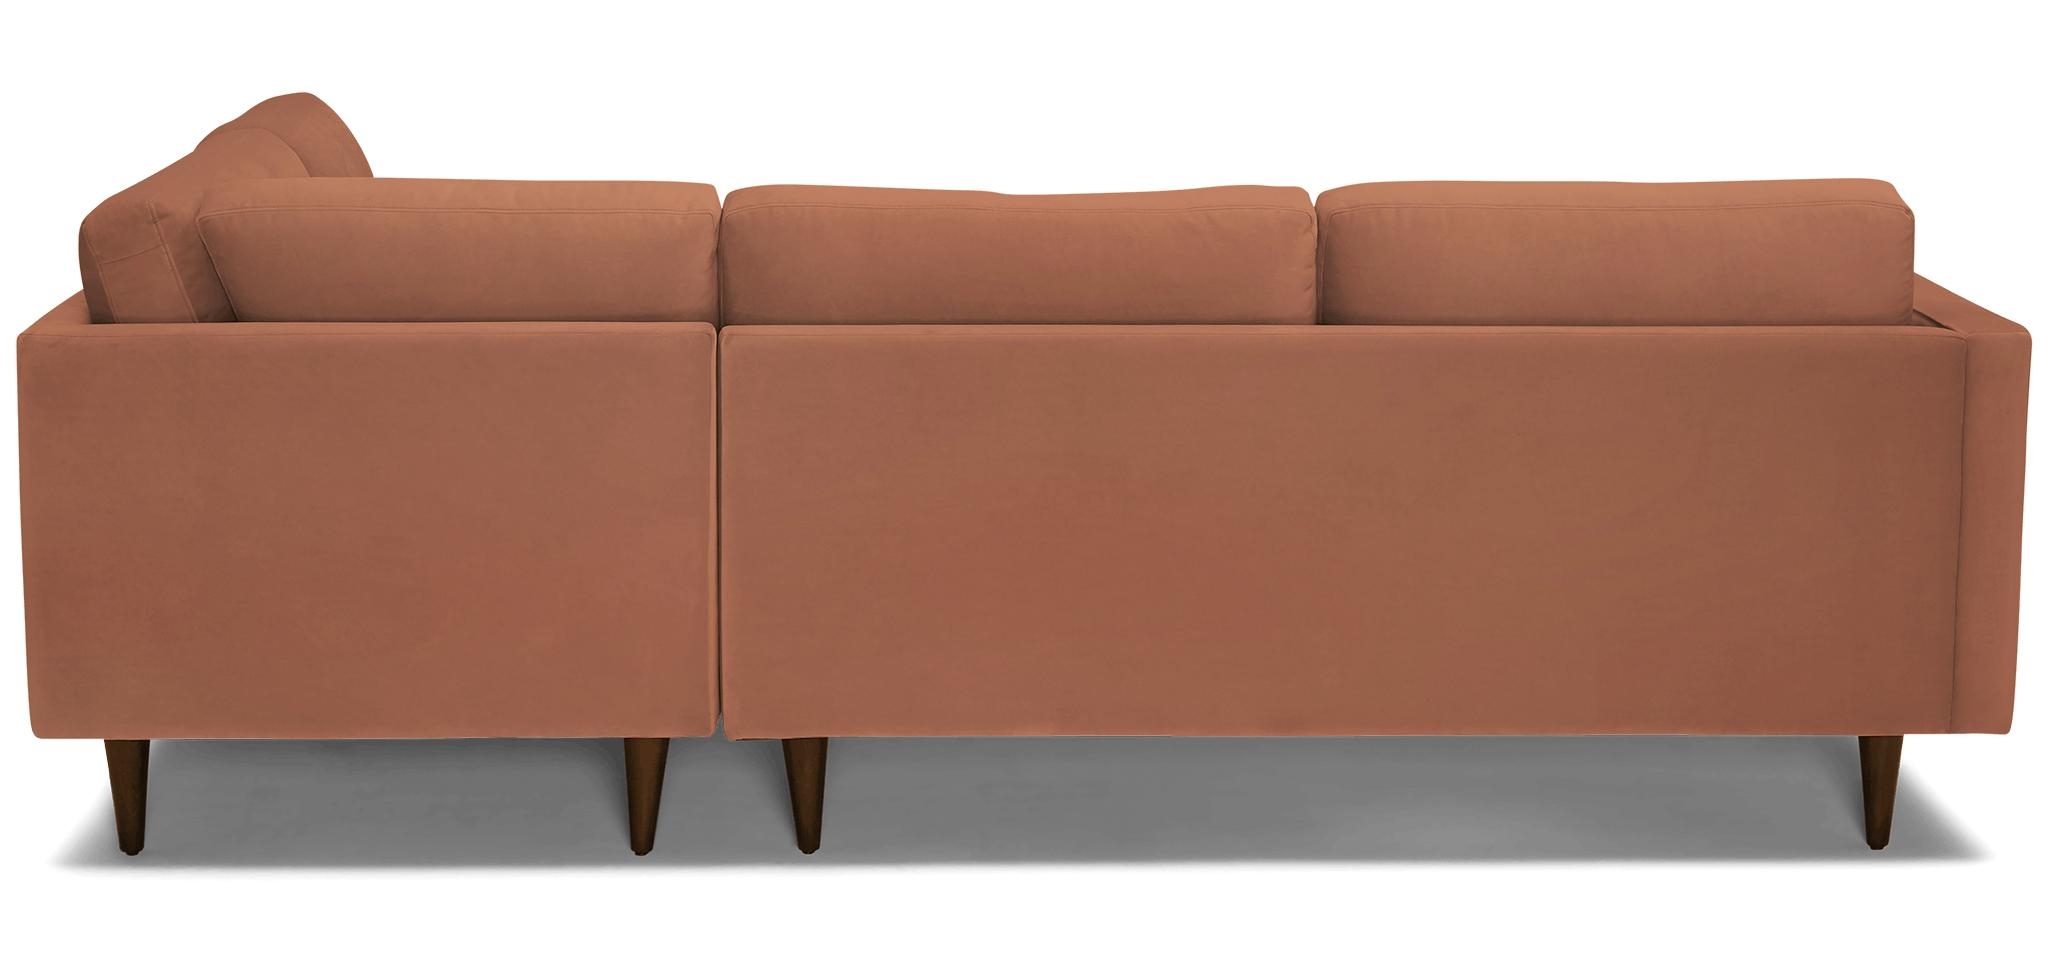 Pink Briar Mid Century Modern Sectional with Bumper - Plush Terra Rose - Mocha - Left - Image 4